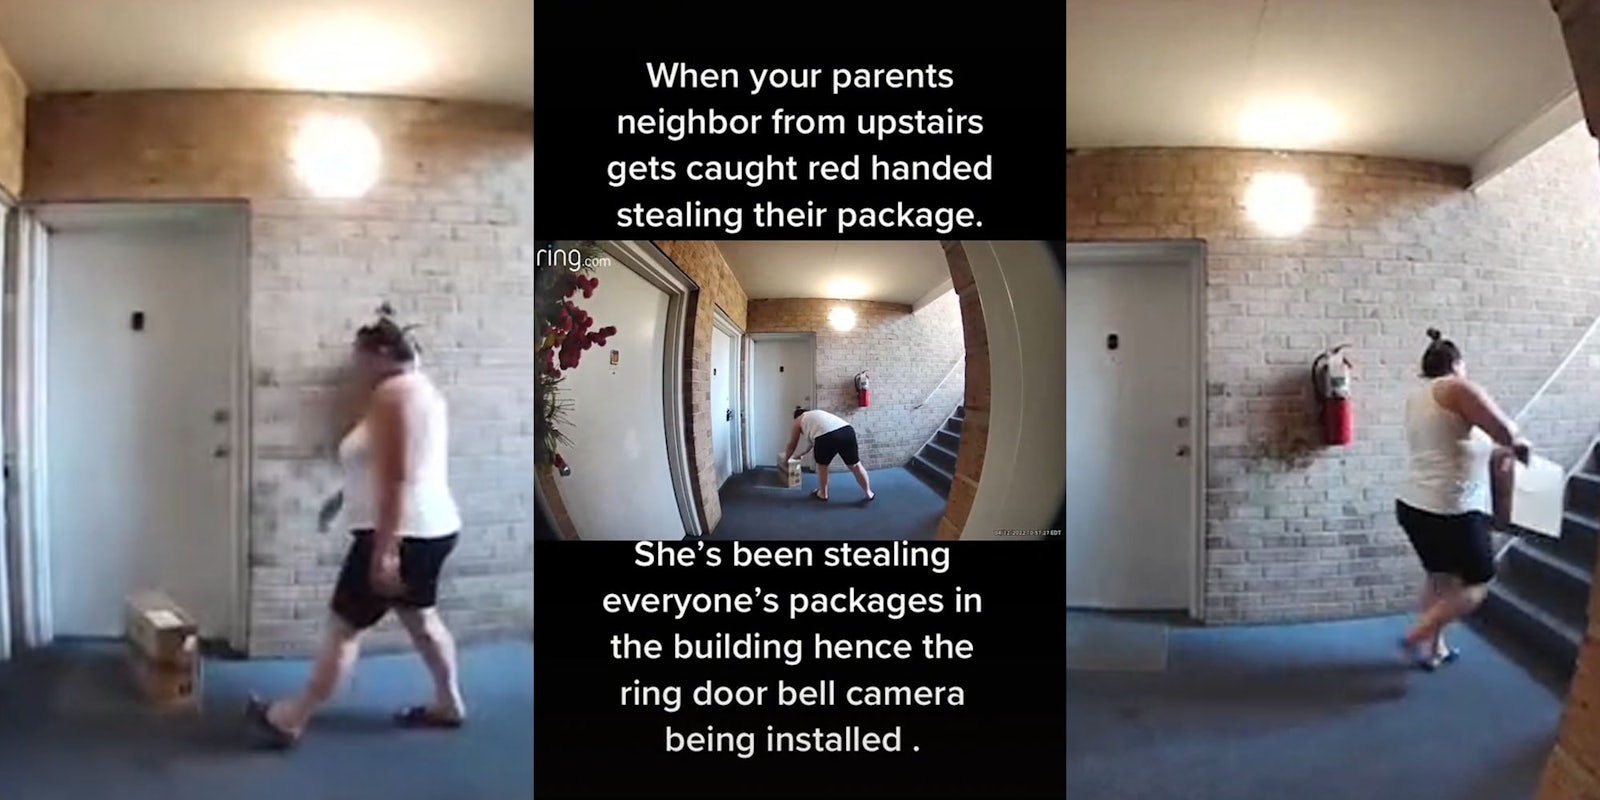 Woman from security footage walking up to package outside neighbors door (l) Woman bending over stealing package caption 'When your parents neighbor from upstairs gets caught red handed stealing their package. She's been stealing packages in the building hence the ring bell camera being installed.' (c) woman on security footage walking away up the stairs with neighbors package in hand (r)